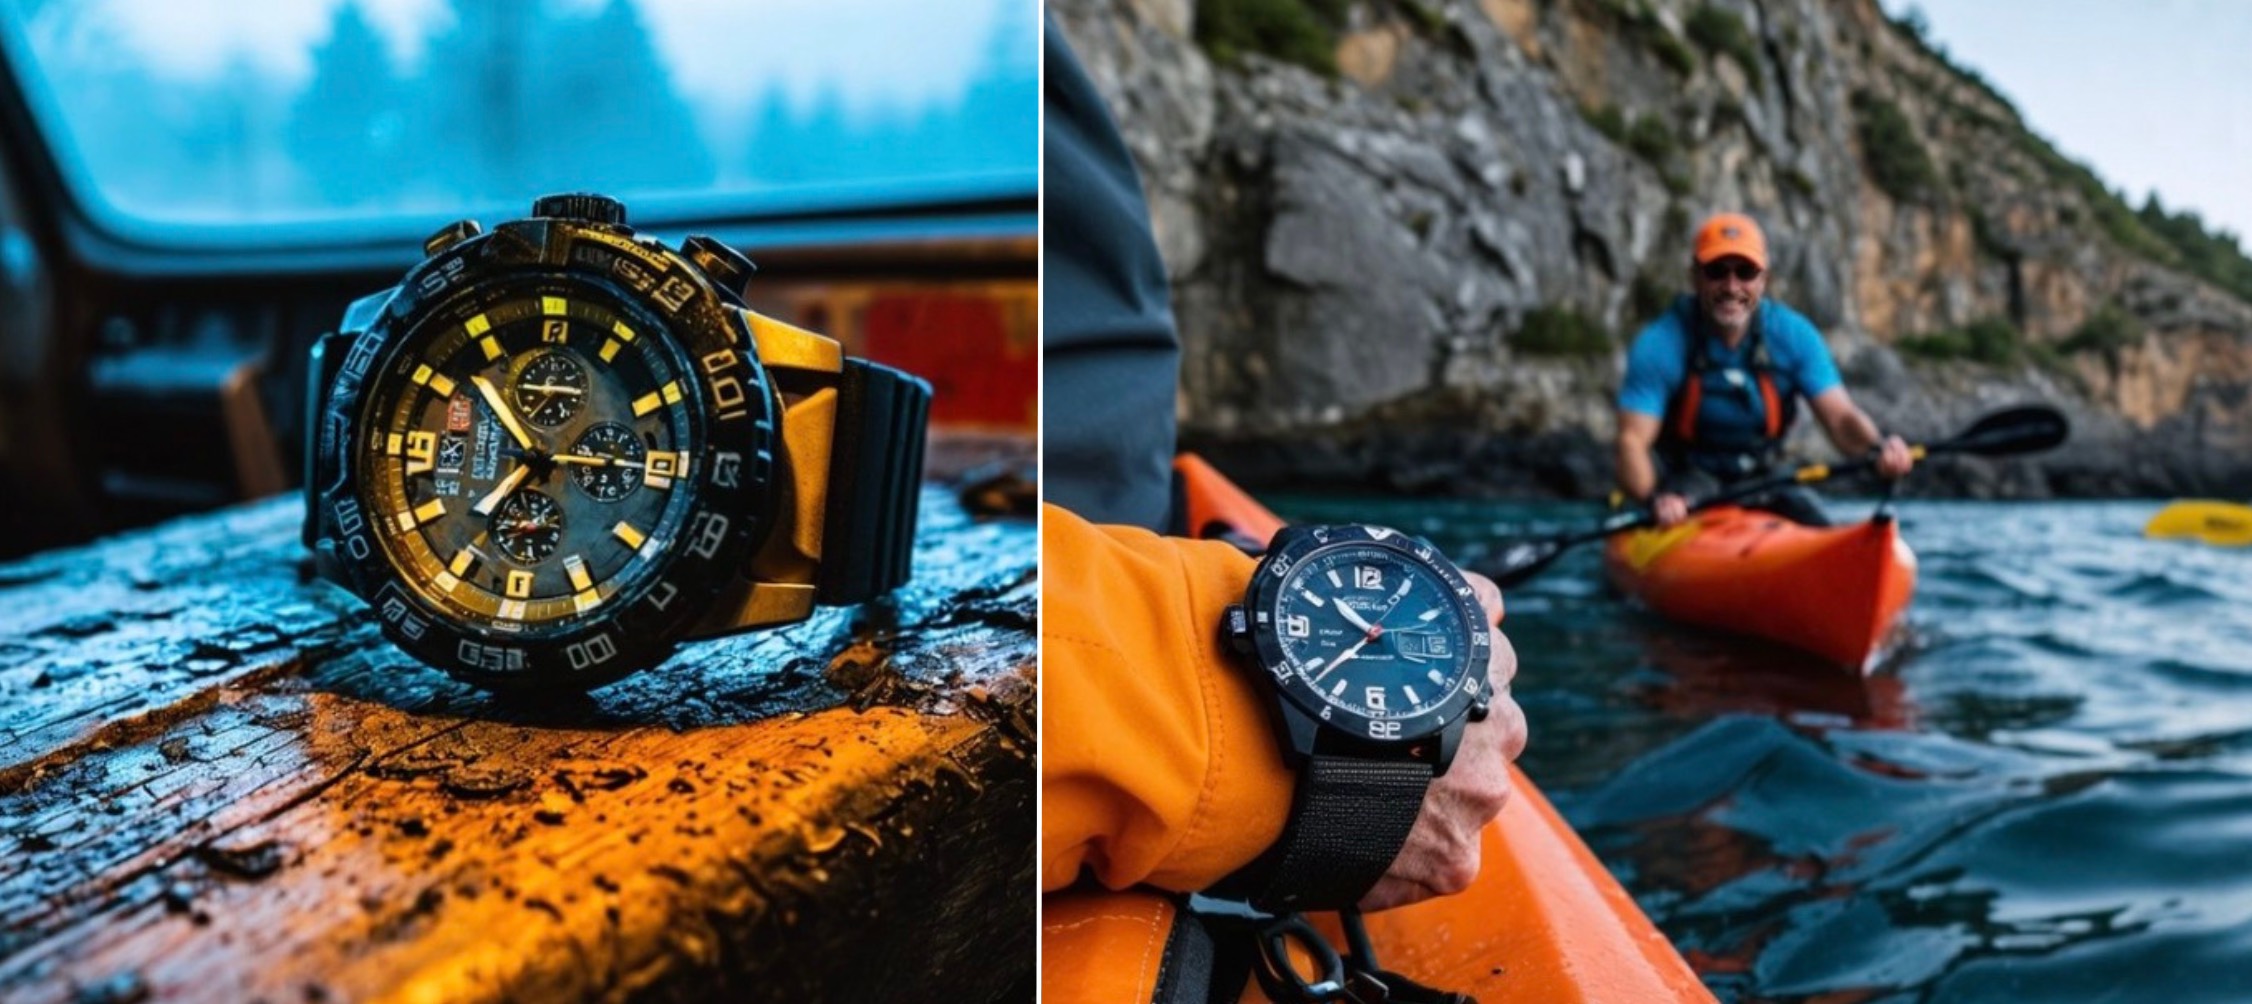 The Top 6 Watches for Adventures in Los Angeles